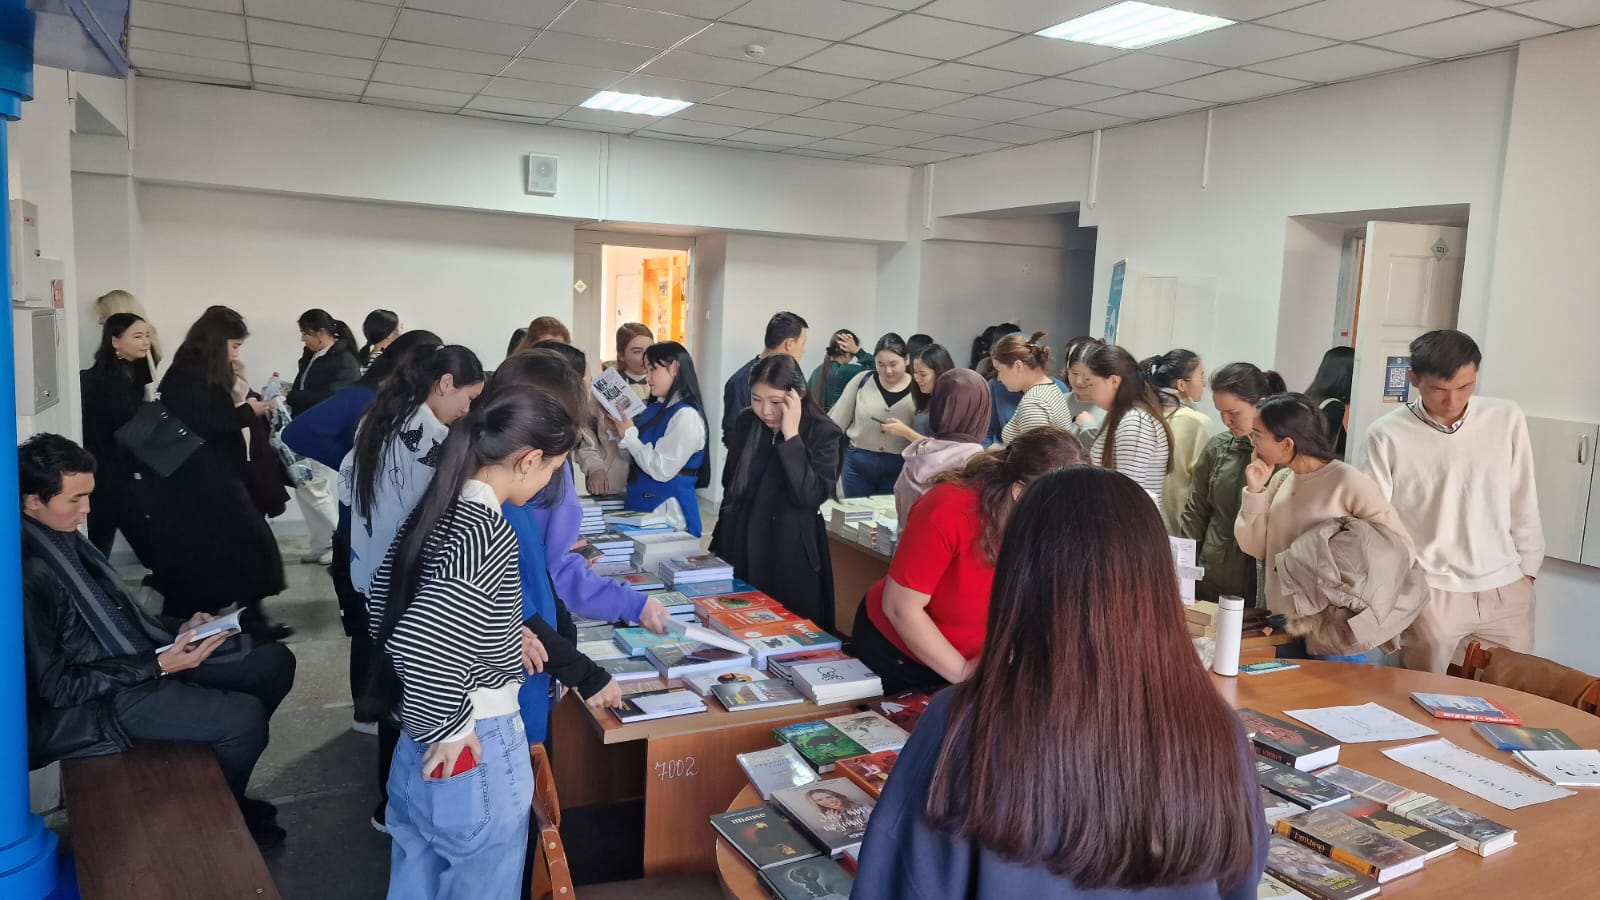 Book fair in partnership with the publishing house “Qazyna” as part of the implementation of the UN SDG to ensure quality education